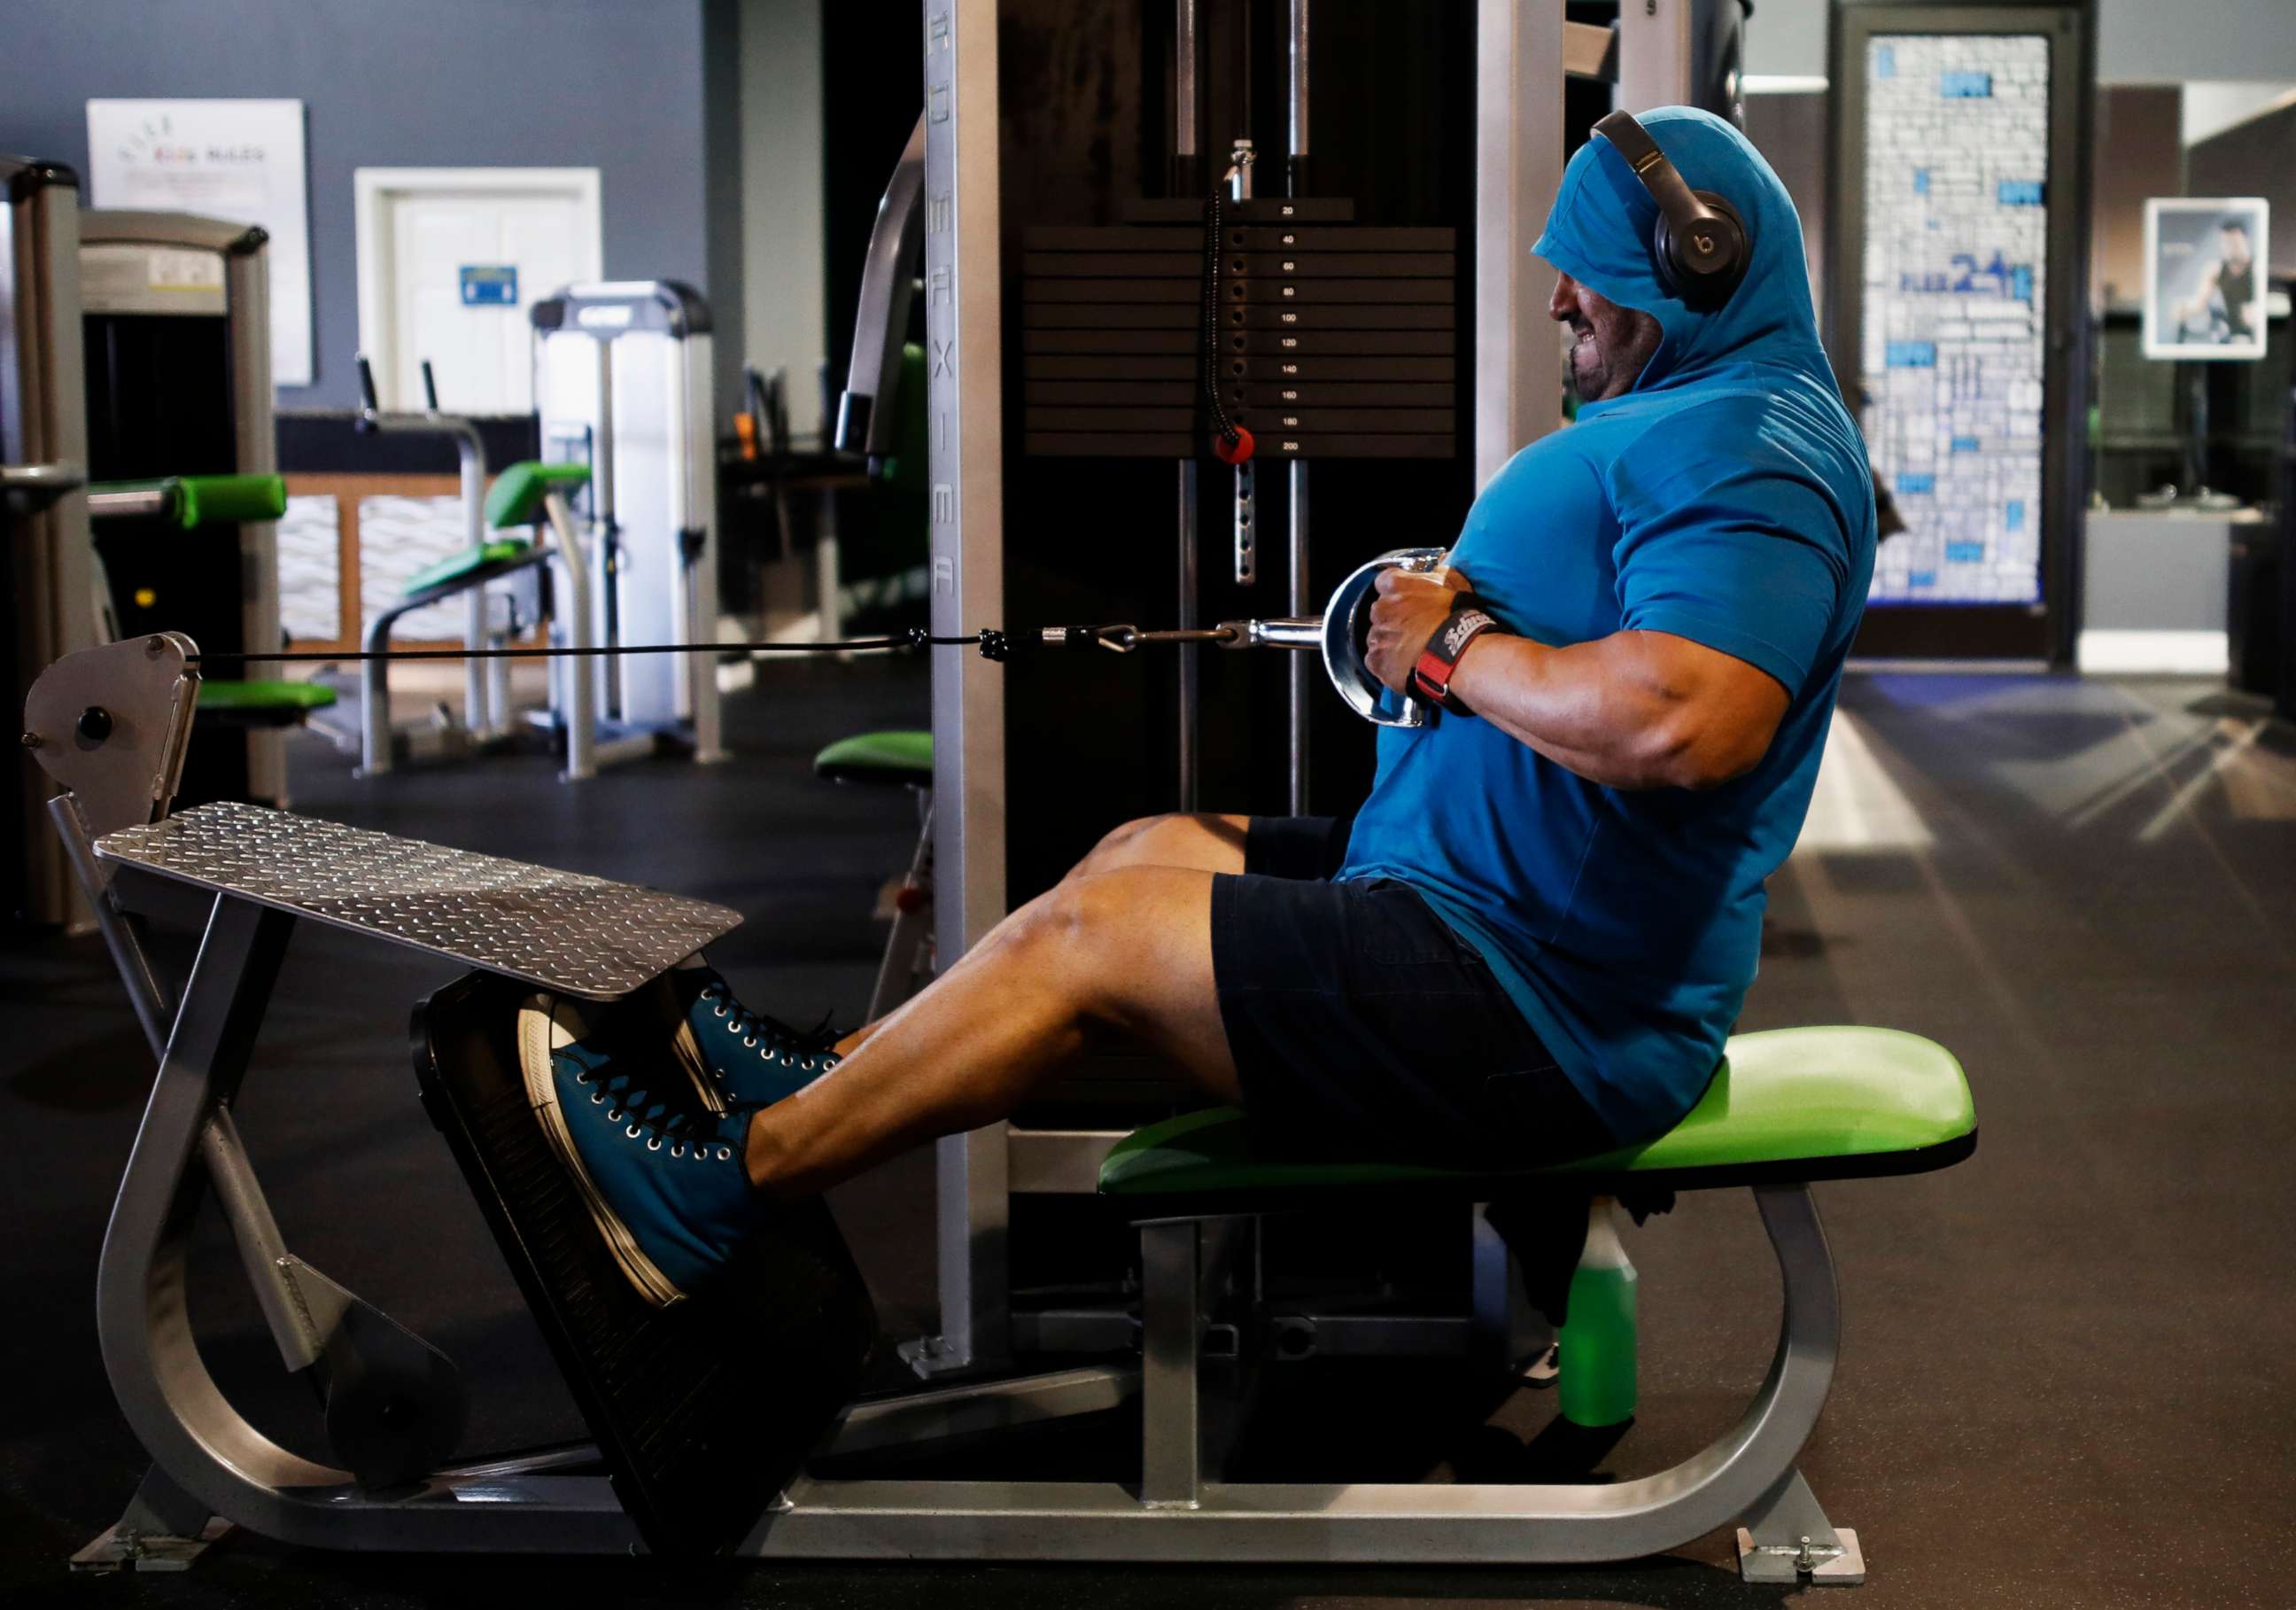 PHOTO: Ruben Munoz uses the seated rowing machine during his workout at Flex 24 in Odessa, Texas, May 18, 2020. 